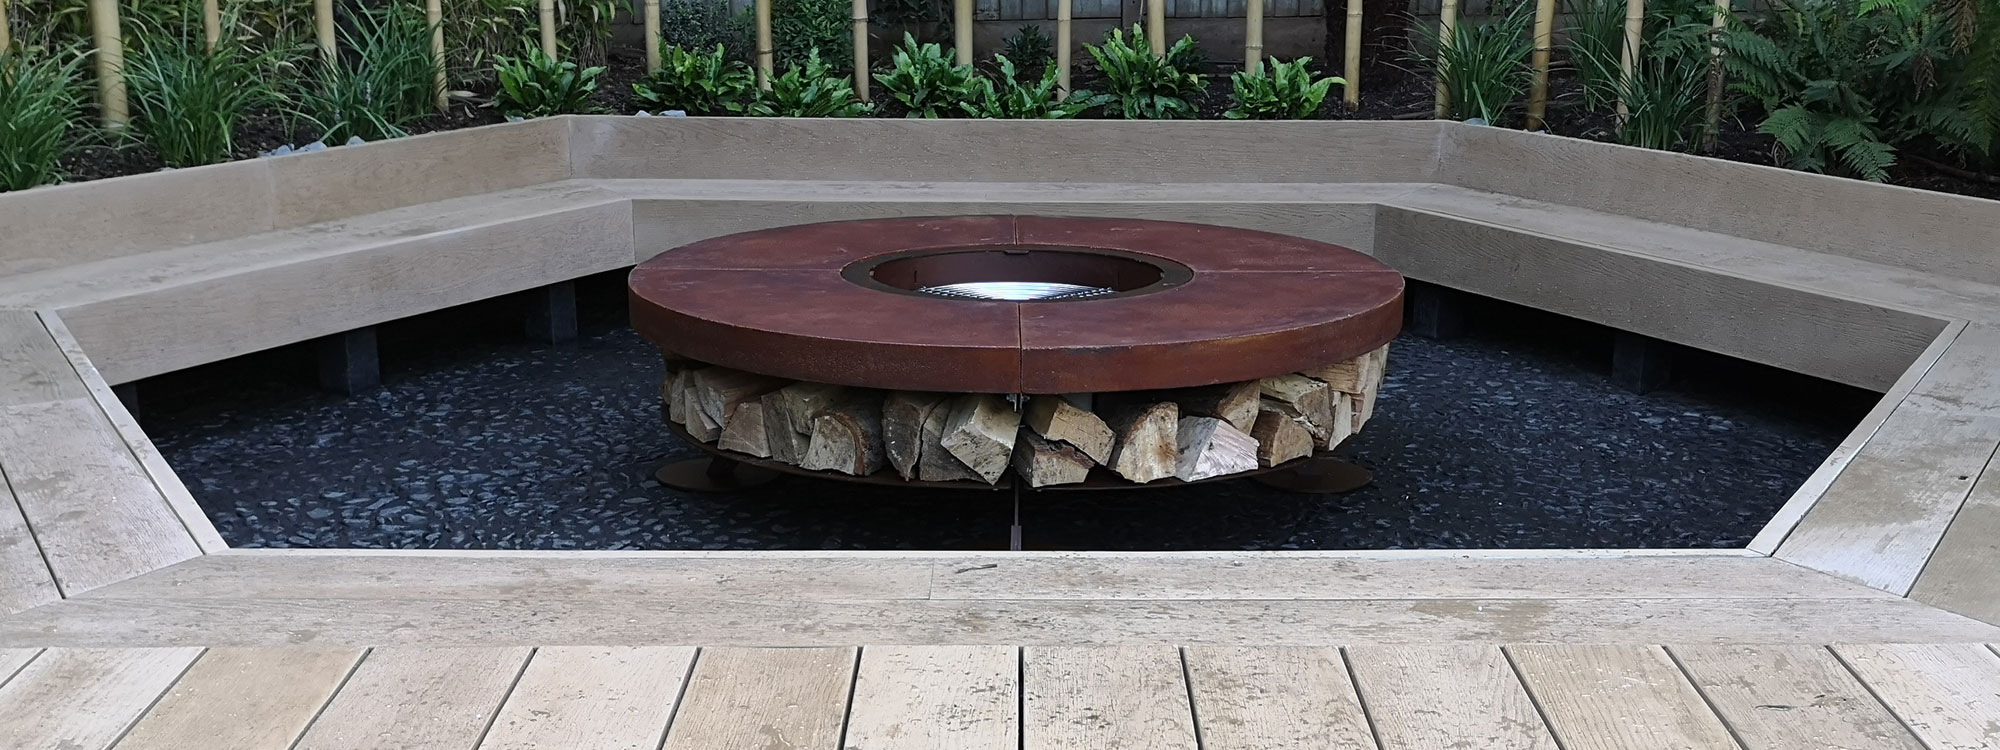 Ercole MODERN Fire Pit Is A LUXURY CONCRETE FIRE PIT In HIGH QUALITY Fire Pit MATERIALS By AK47 Italian Fire Pit Company